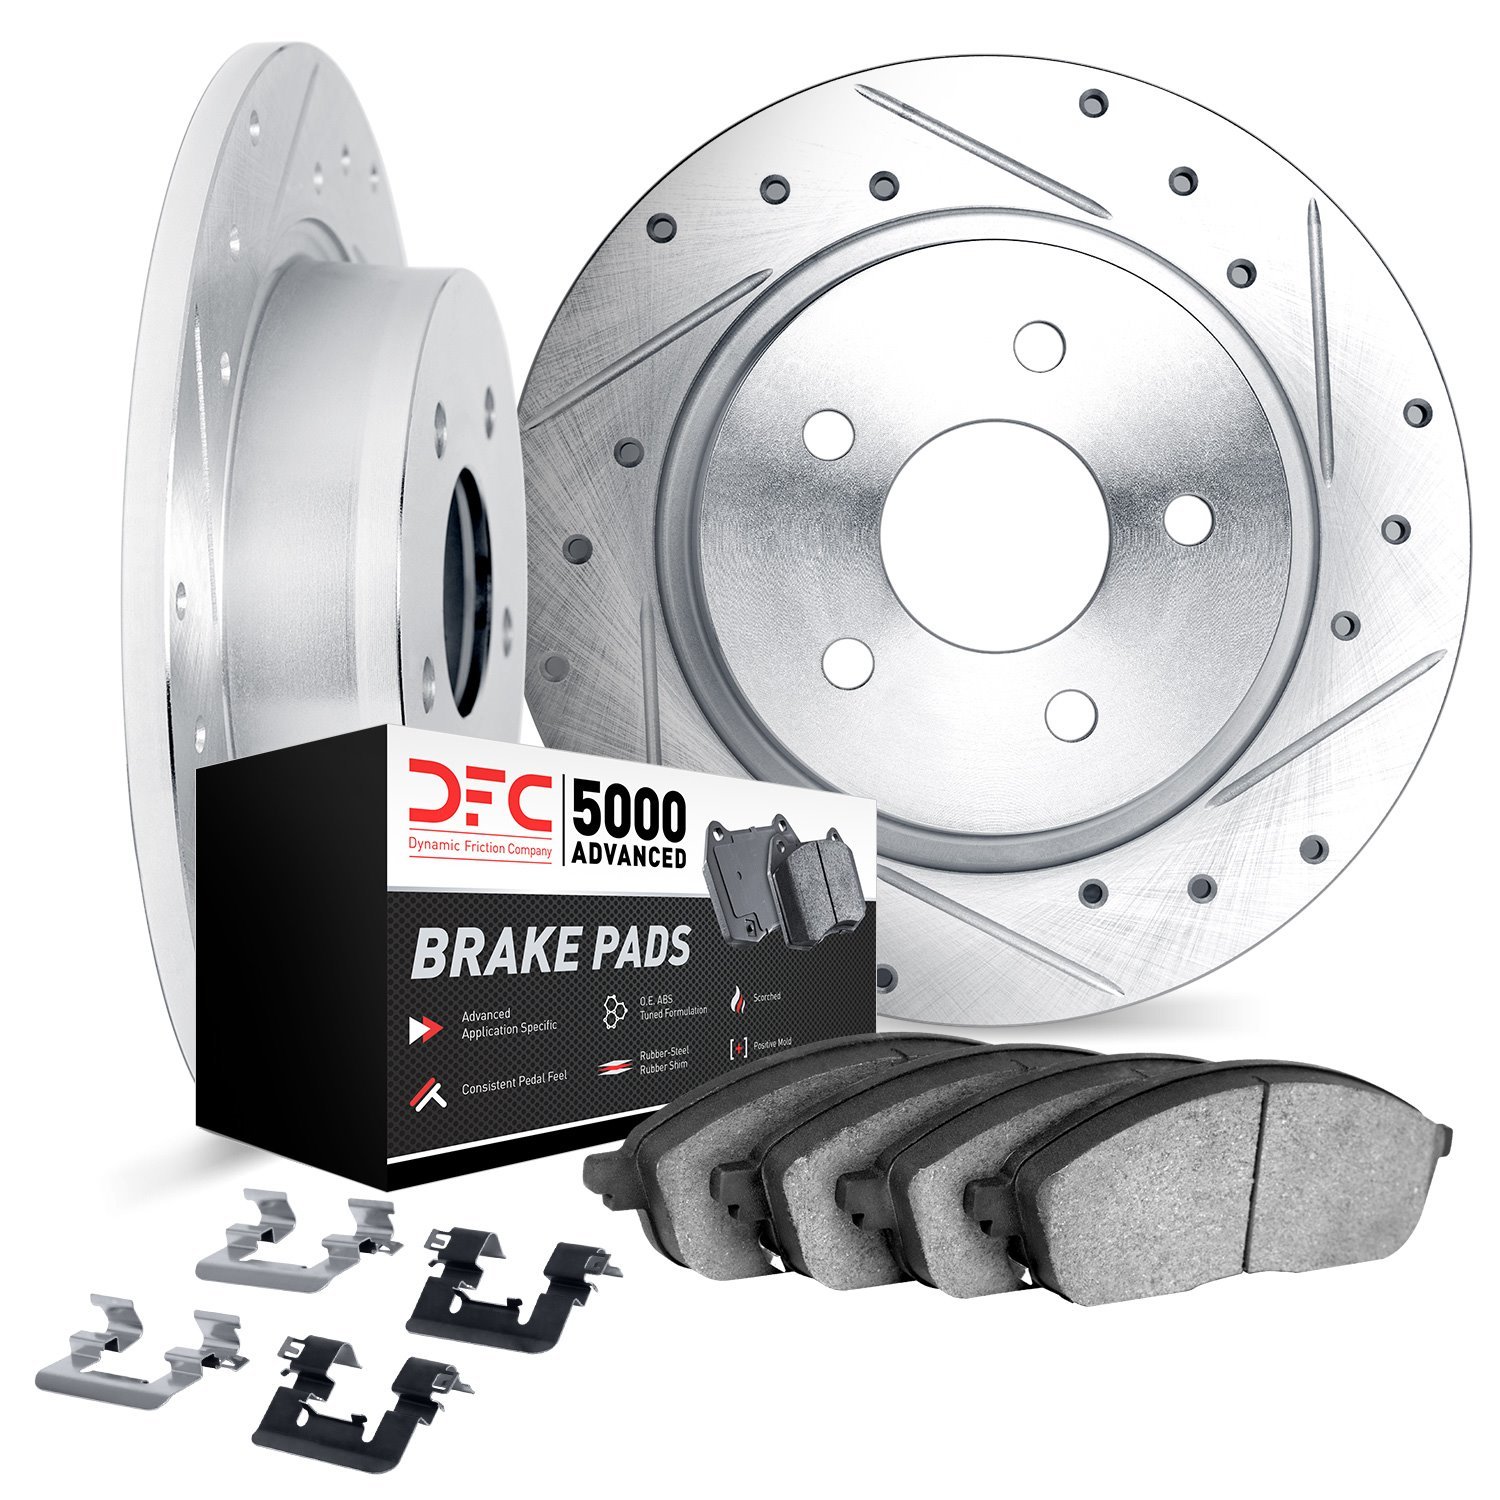 7512-67124 Drilled/Slotted Brake Rotors w/5000 Advanced Brake Pads Kit & Hardware [Silver], Fits Select Infiniti/Nissan, Positio